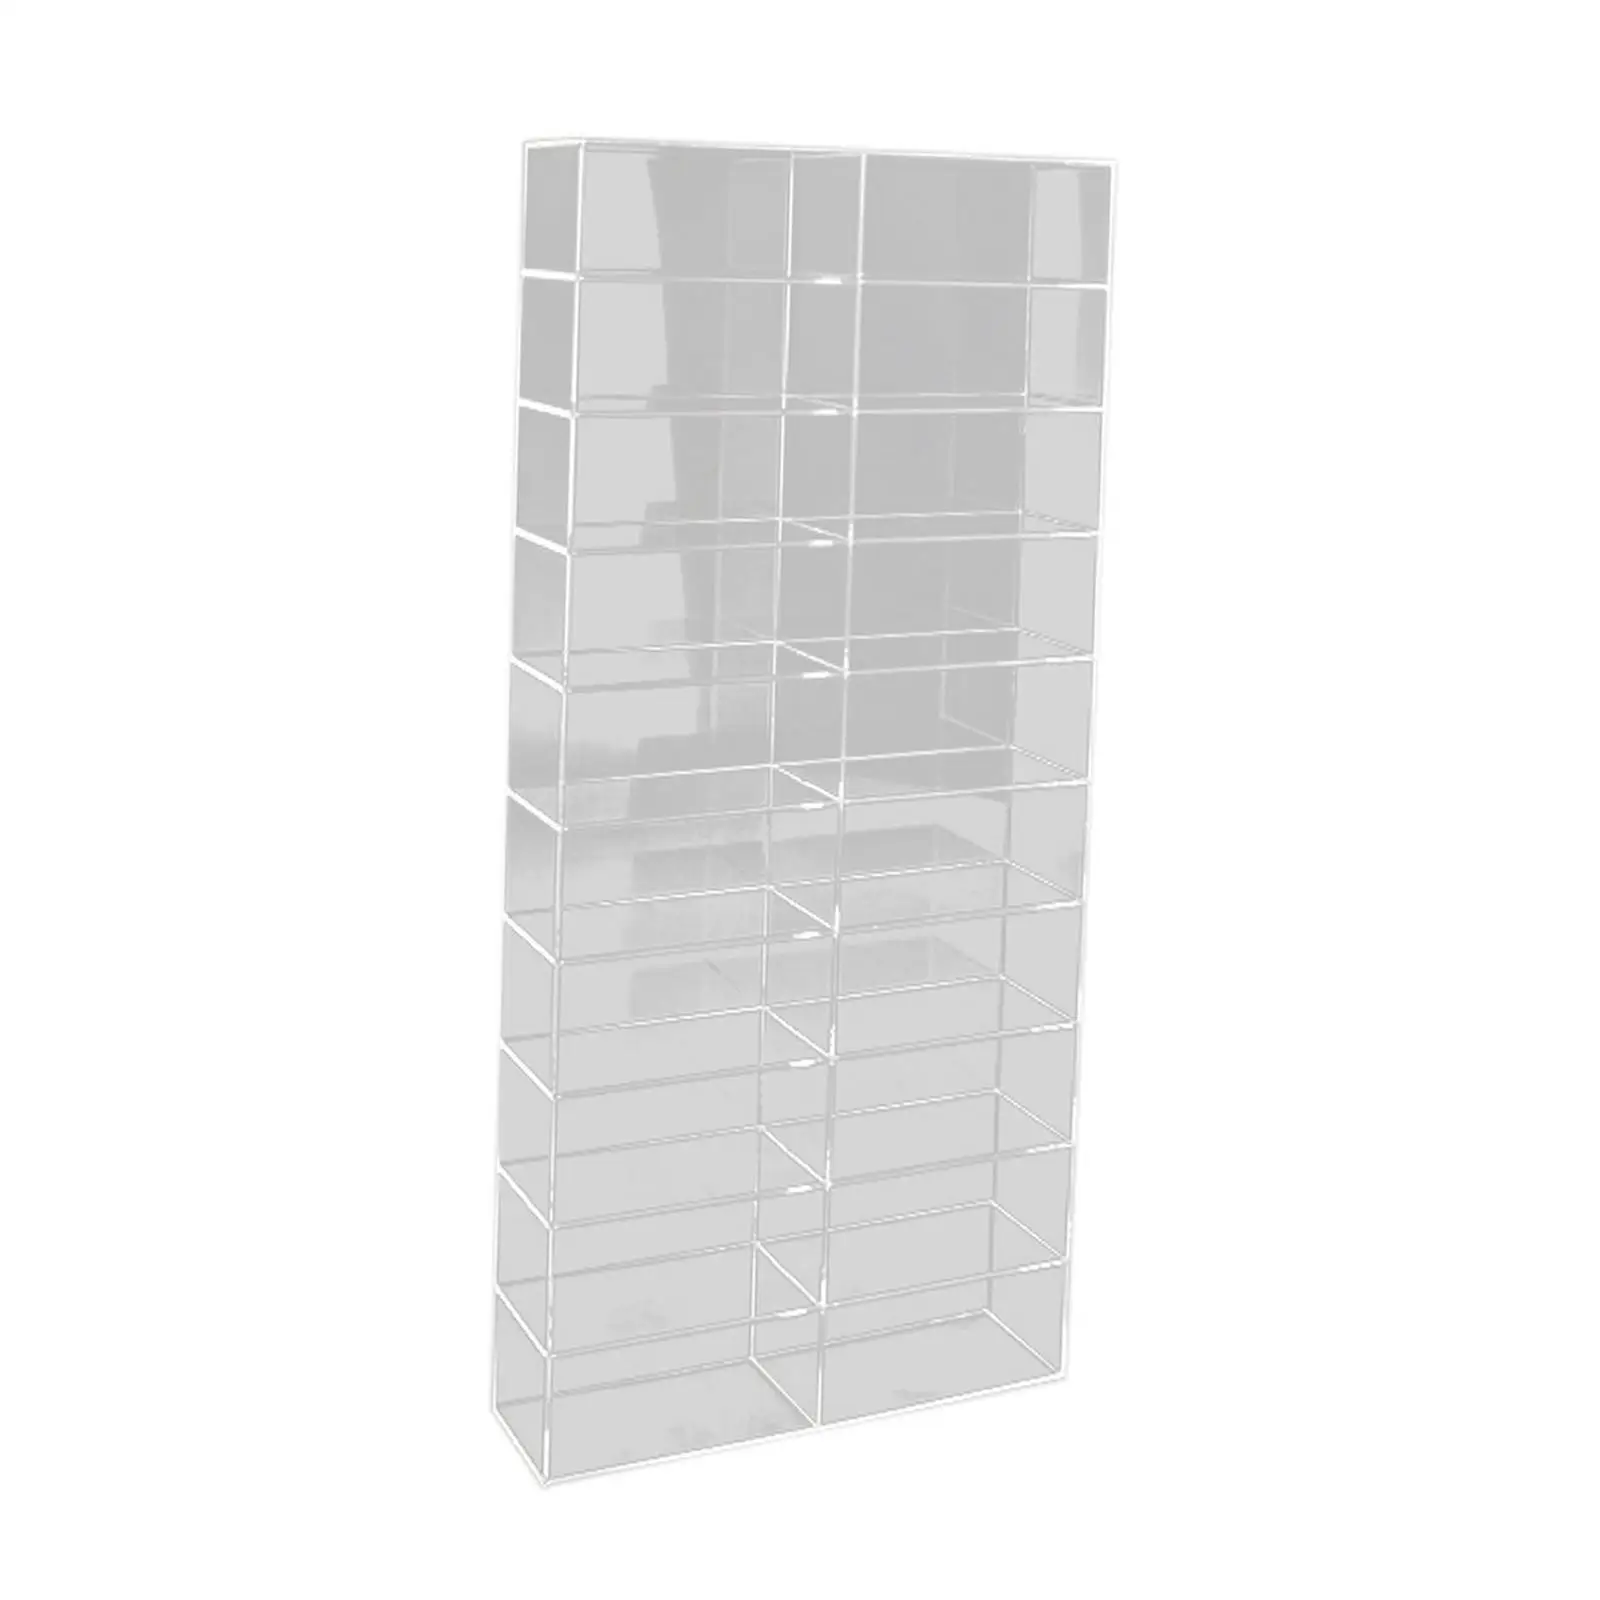 Clear 1/64 Model Car Display Case Display Rack Action Figures Holder Showcase Toys Display Case for Collectibles Model Car Toy